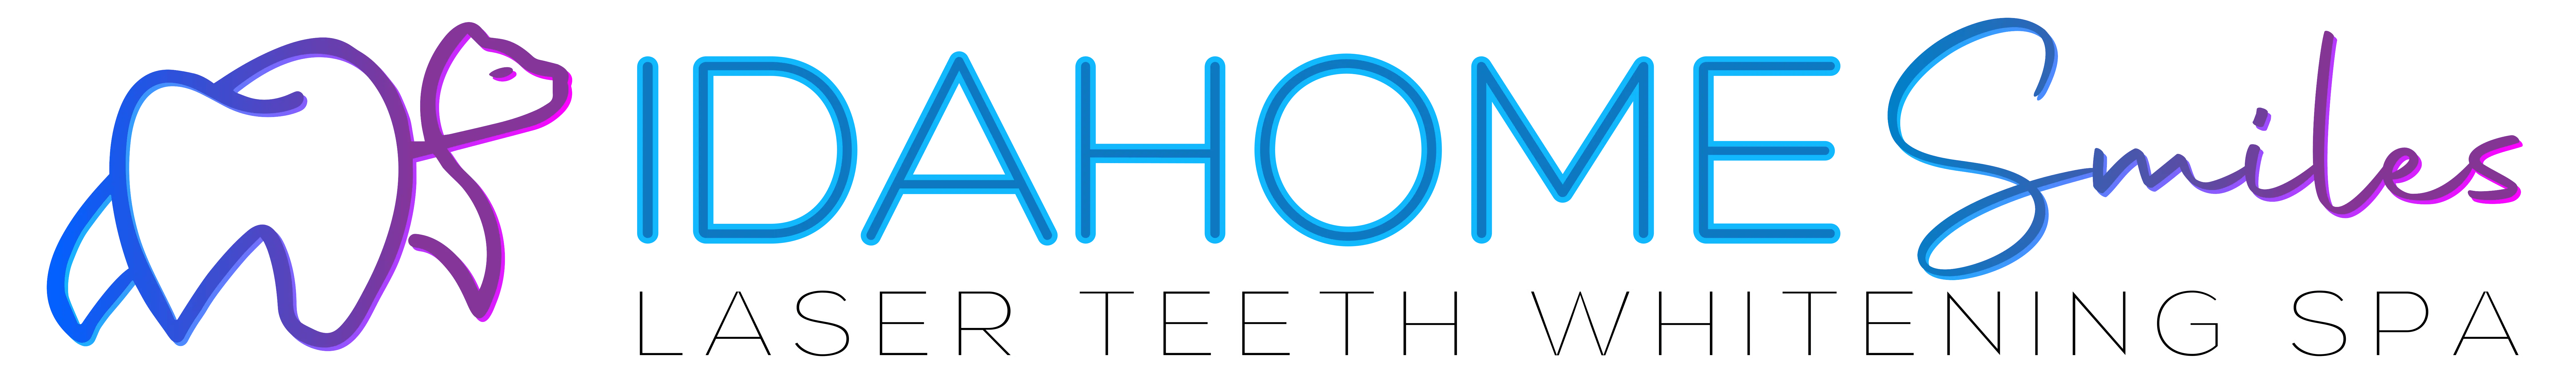 Idahome Smiles logo featuring a neon blue and purple tooth with a bear silhouette, representing the premier Laser Teeth Whitening Spa located in Historic Downtown Boise, Idaho, offering the Molar Bear Retreat for a bright, healthy smile.